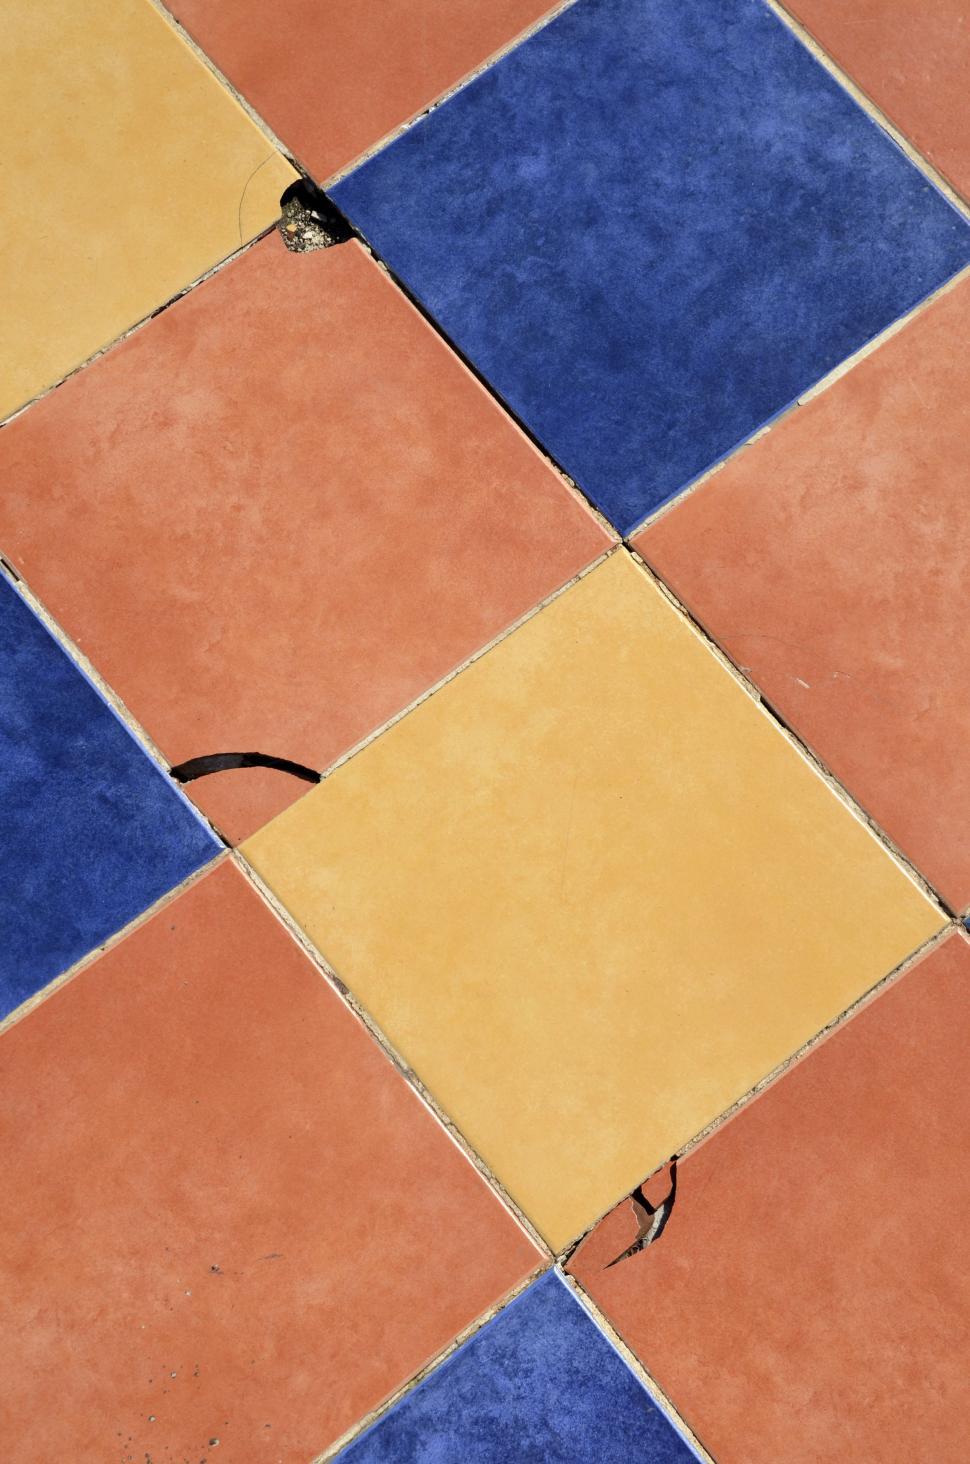 Free Image of Close Up of Multicolored Tiled Floor 